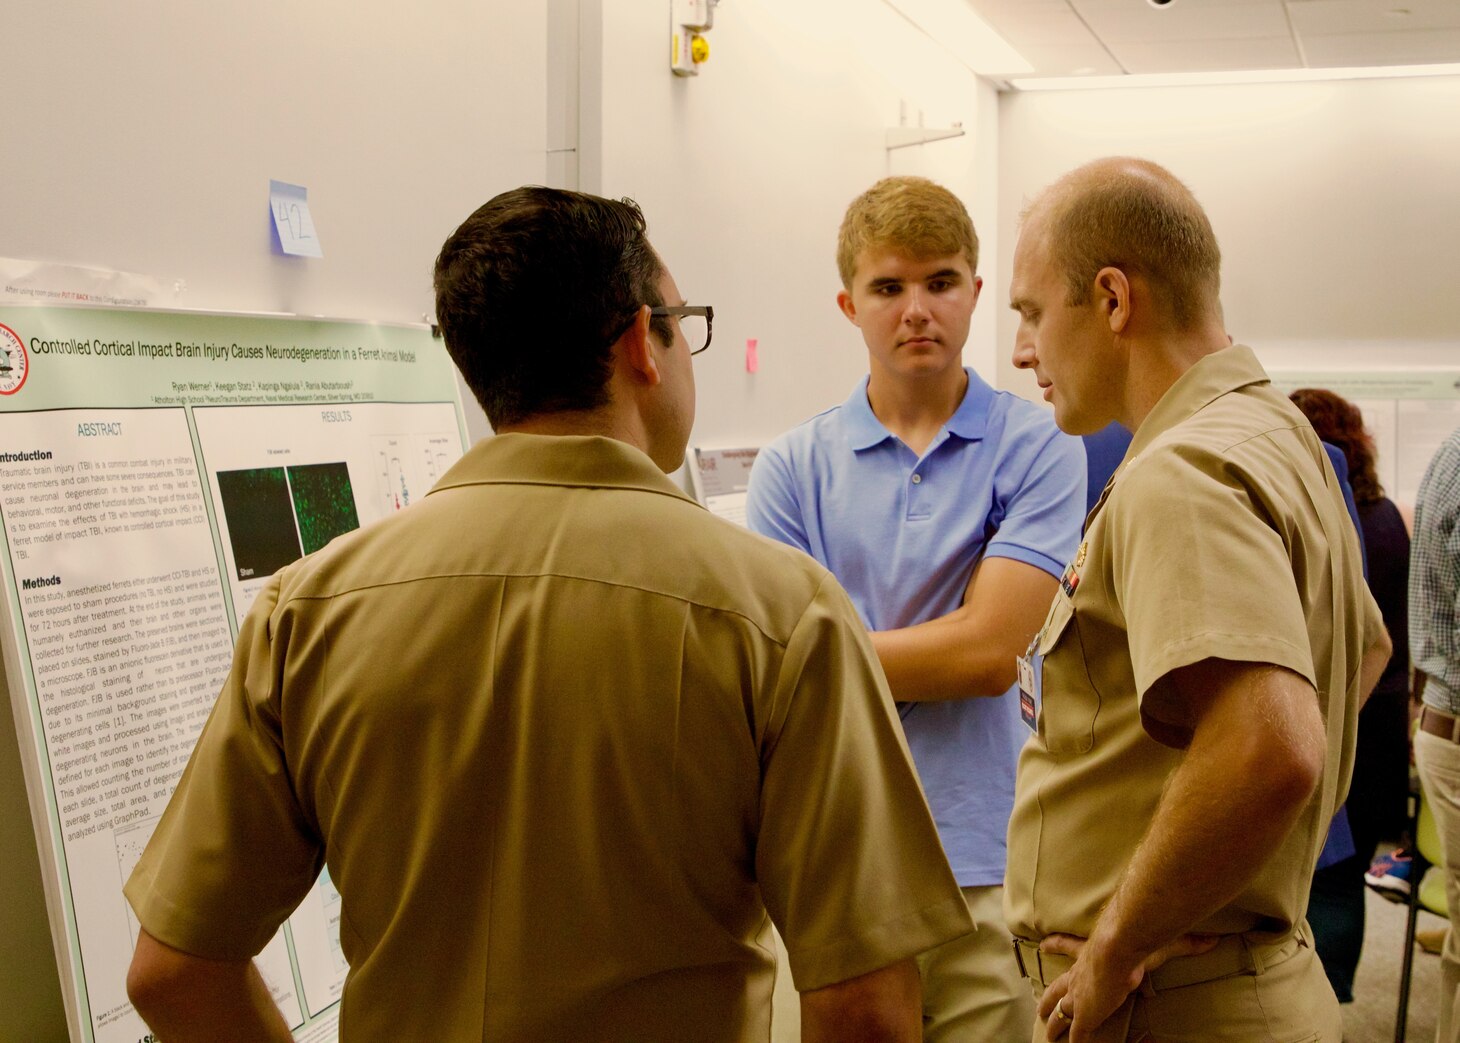 Ryan Werner (center), an intern with the Naval Research Enterprise Internship Program (NREIP) explains findings from a research poster to Naval Medical Research Center (NMRC) staff. Interns from NMRC and Walter Reed Army Institute of Research presented on research they participated in at an annual joint STEM Expo Poster Session, which marked the final day of the summer program. (U.S. Navy photo by Sidney Hinds/Released)